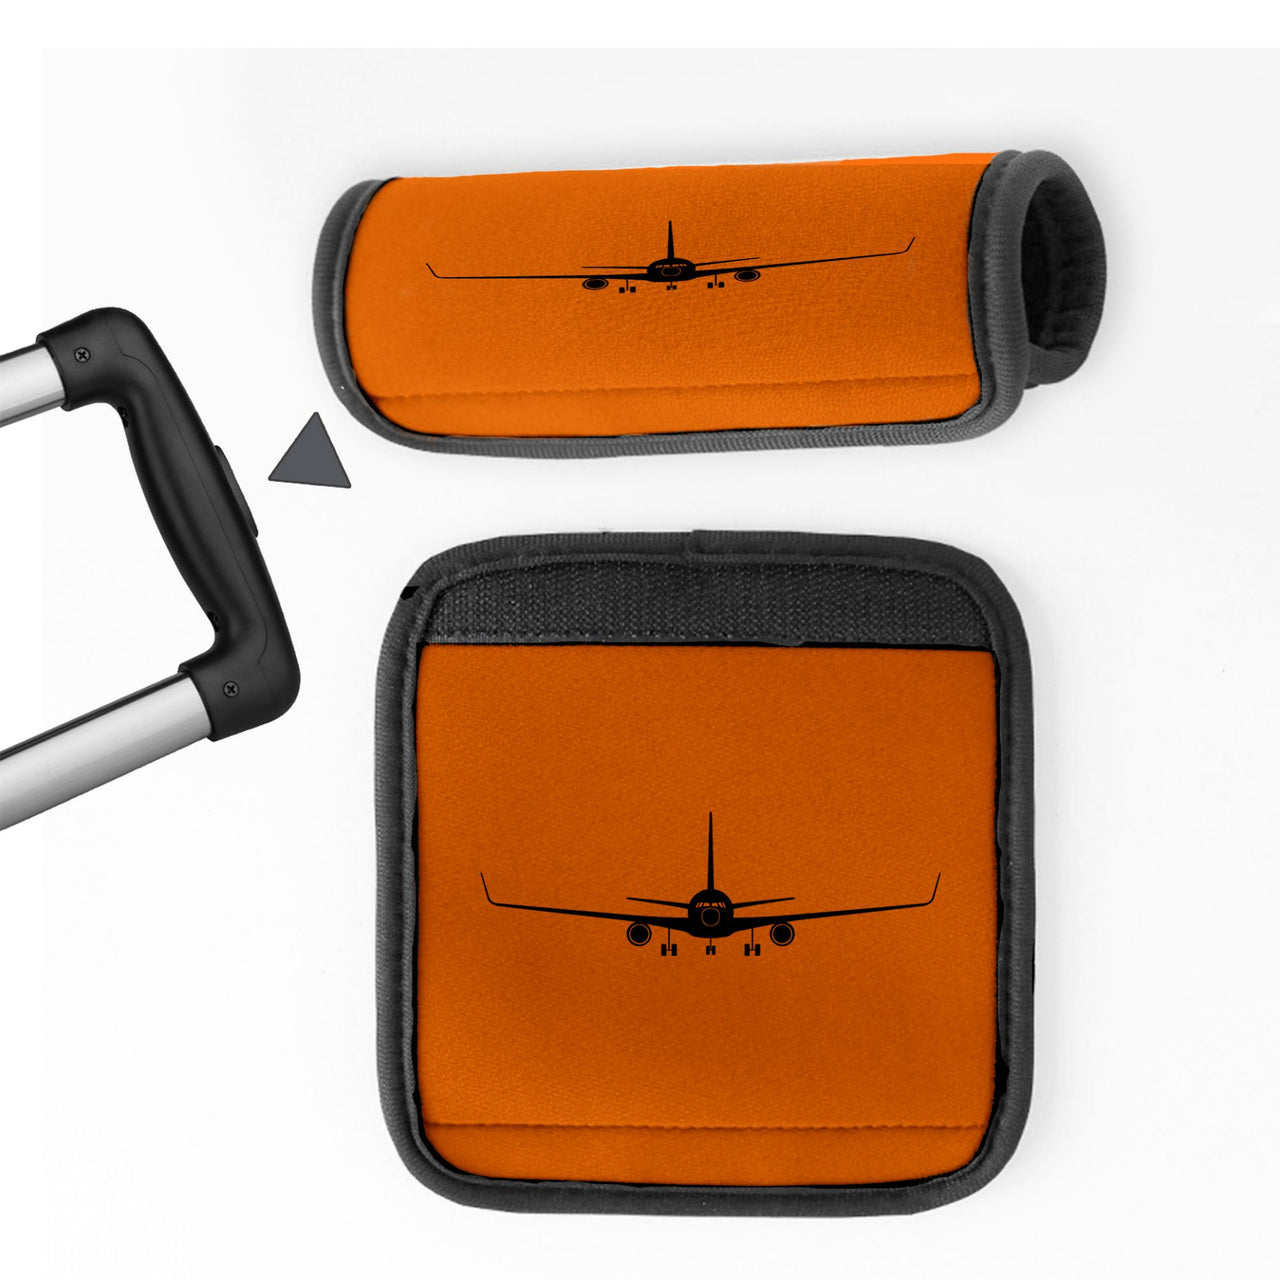 Boeing 767 Silhouette Designed Neoprene Luggage Handle Covers